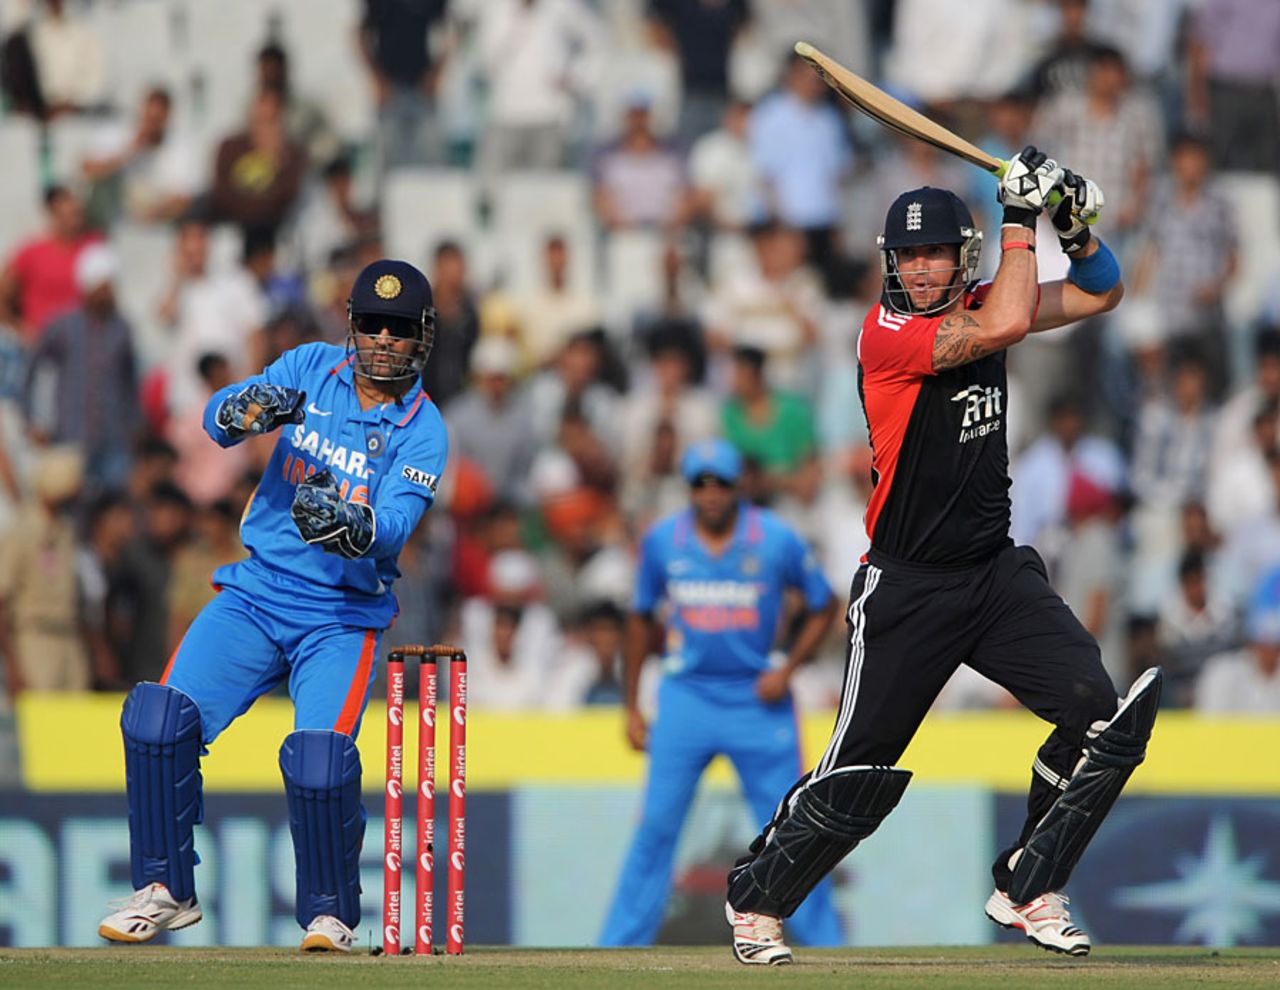 Kevin Pietersen gave England a lift with a positive half-century, India v England, 3rd ODI, Mohali, October 20, 2011